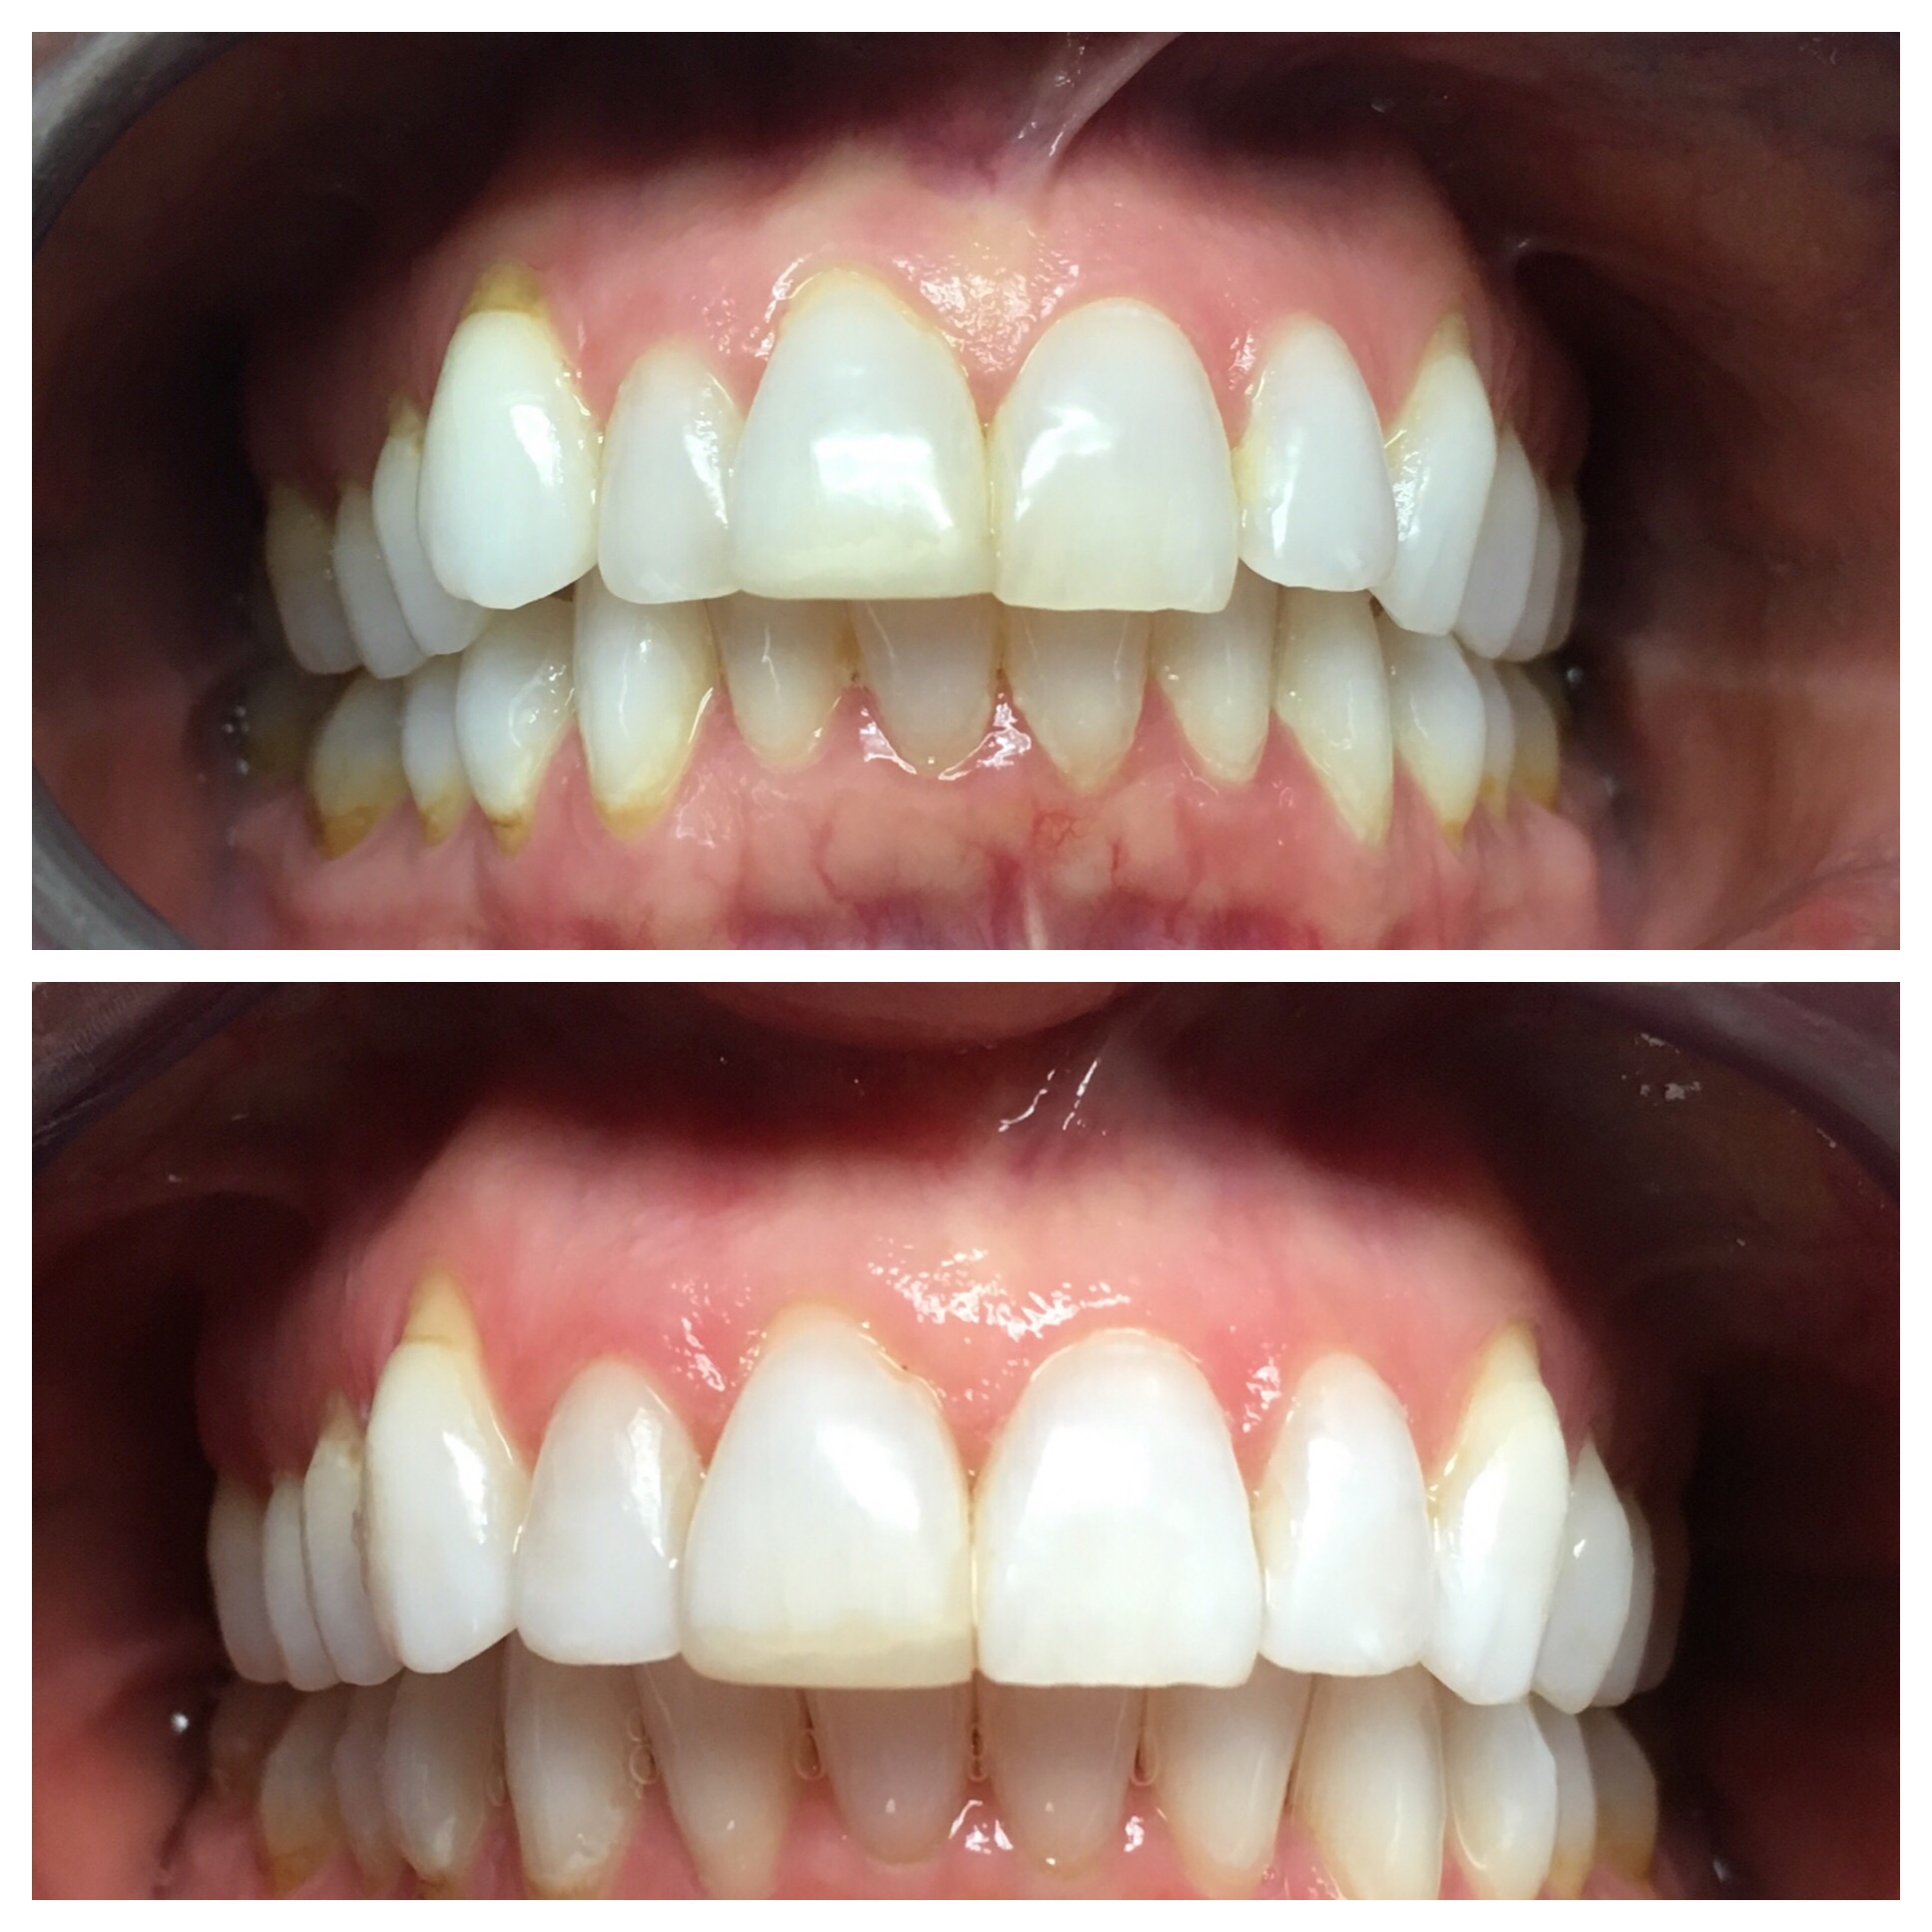 This patient was treated in under 12 months